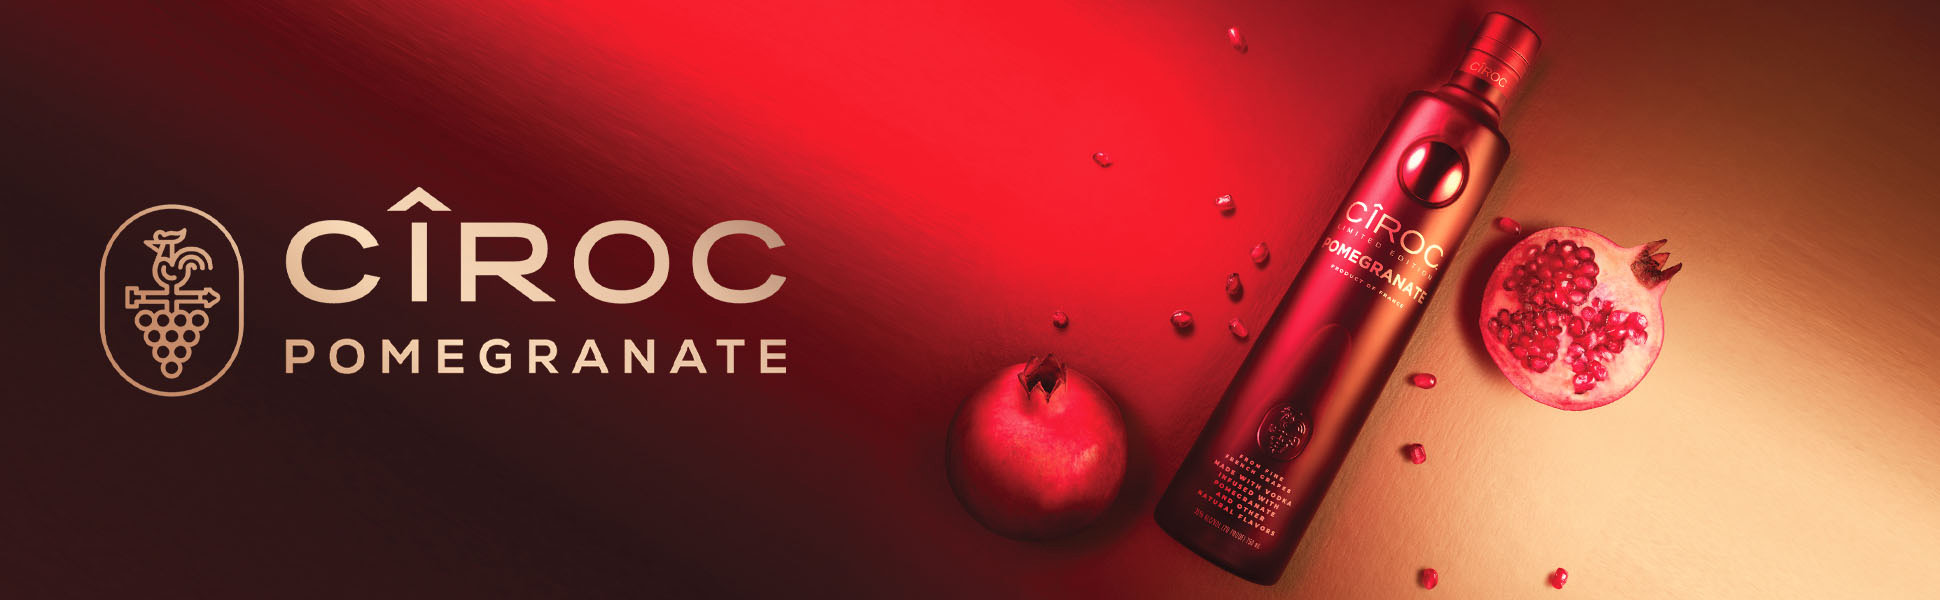 Ciroc Pomegranate Banner with bottle